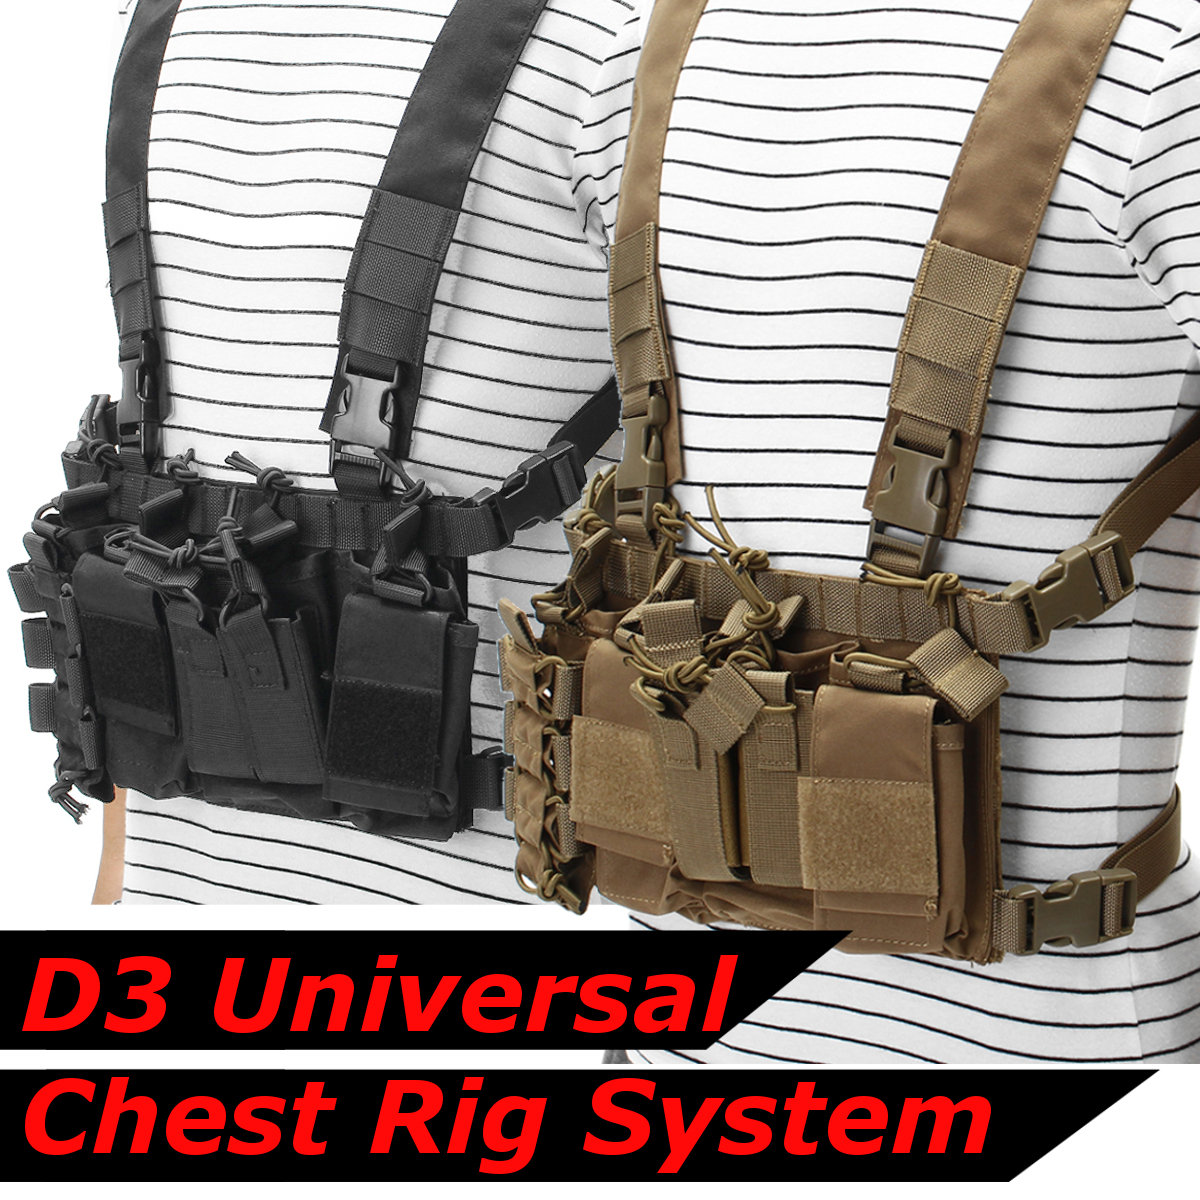 52x65cm-Nylon-Universal-Chest-Rig-Hunting-Vest-with-223308-Pouches-2-Colors-1358349-2